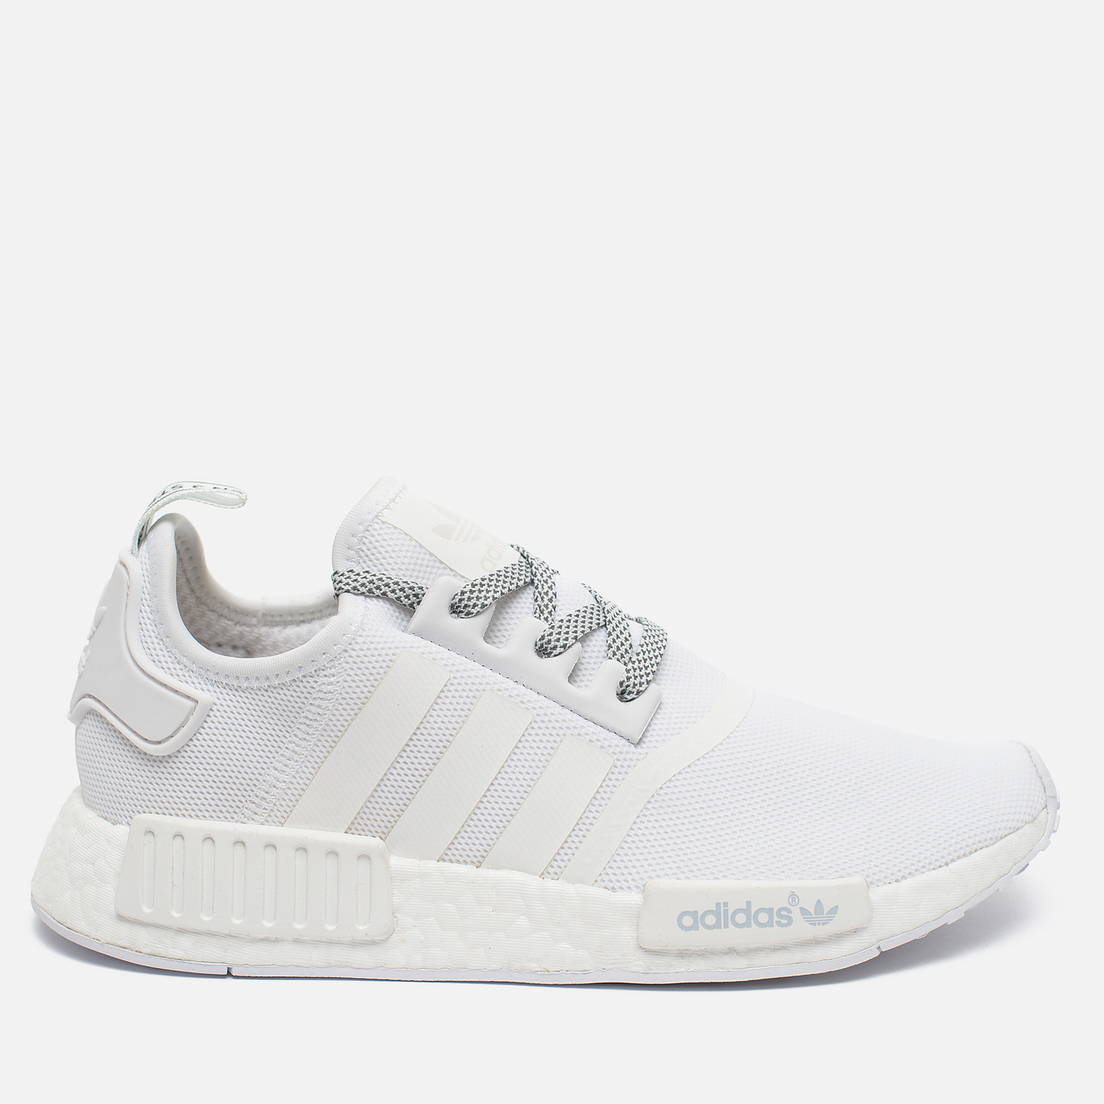 all white nmd r1